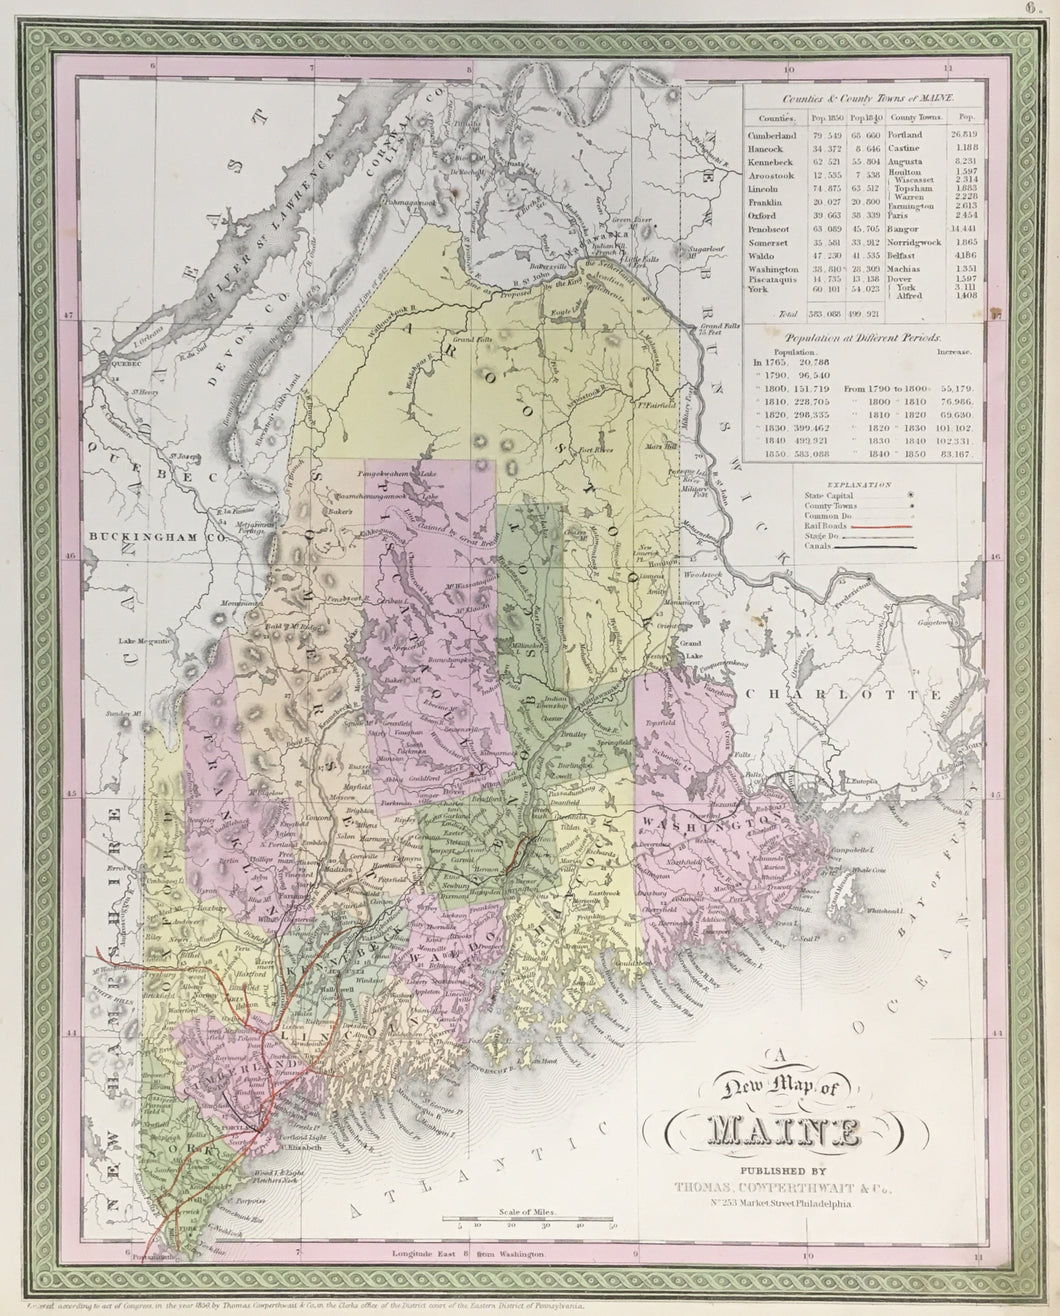 Mitchell, S. Augustus  “A New Map of Maine.”